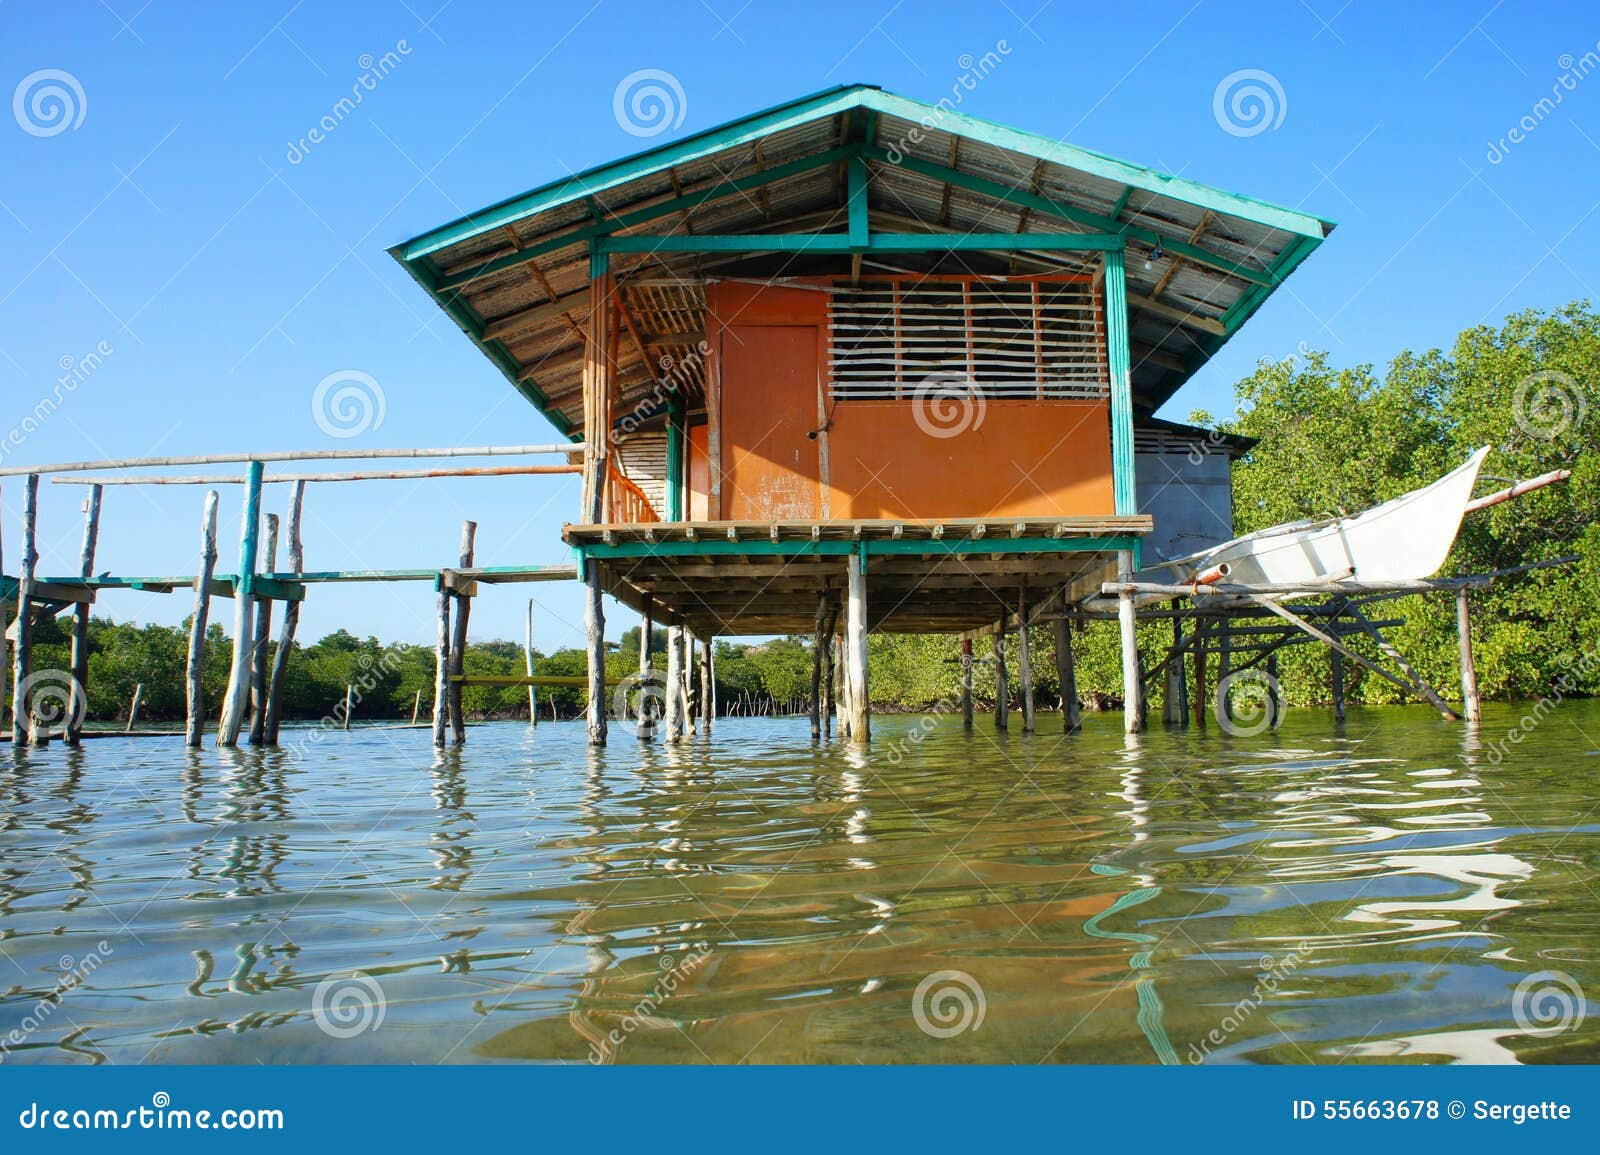 Traditional Stilts House And Boat In Water Under Blue Sky 